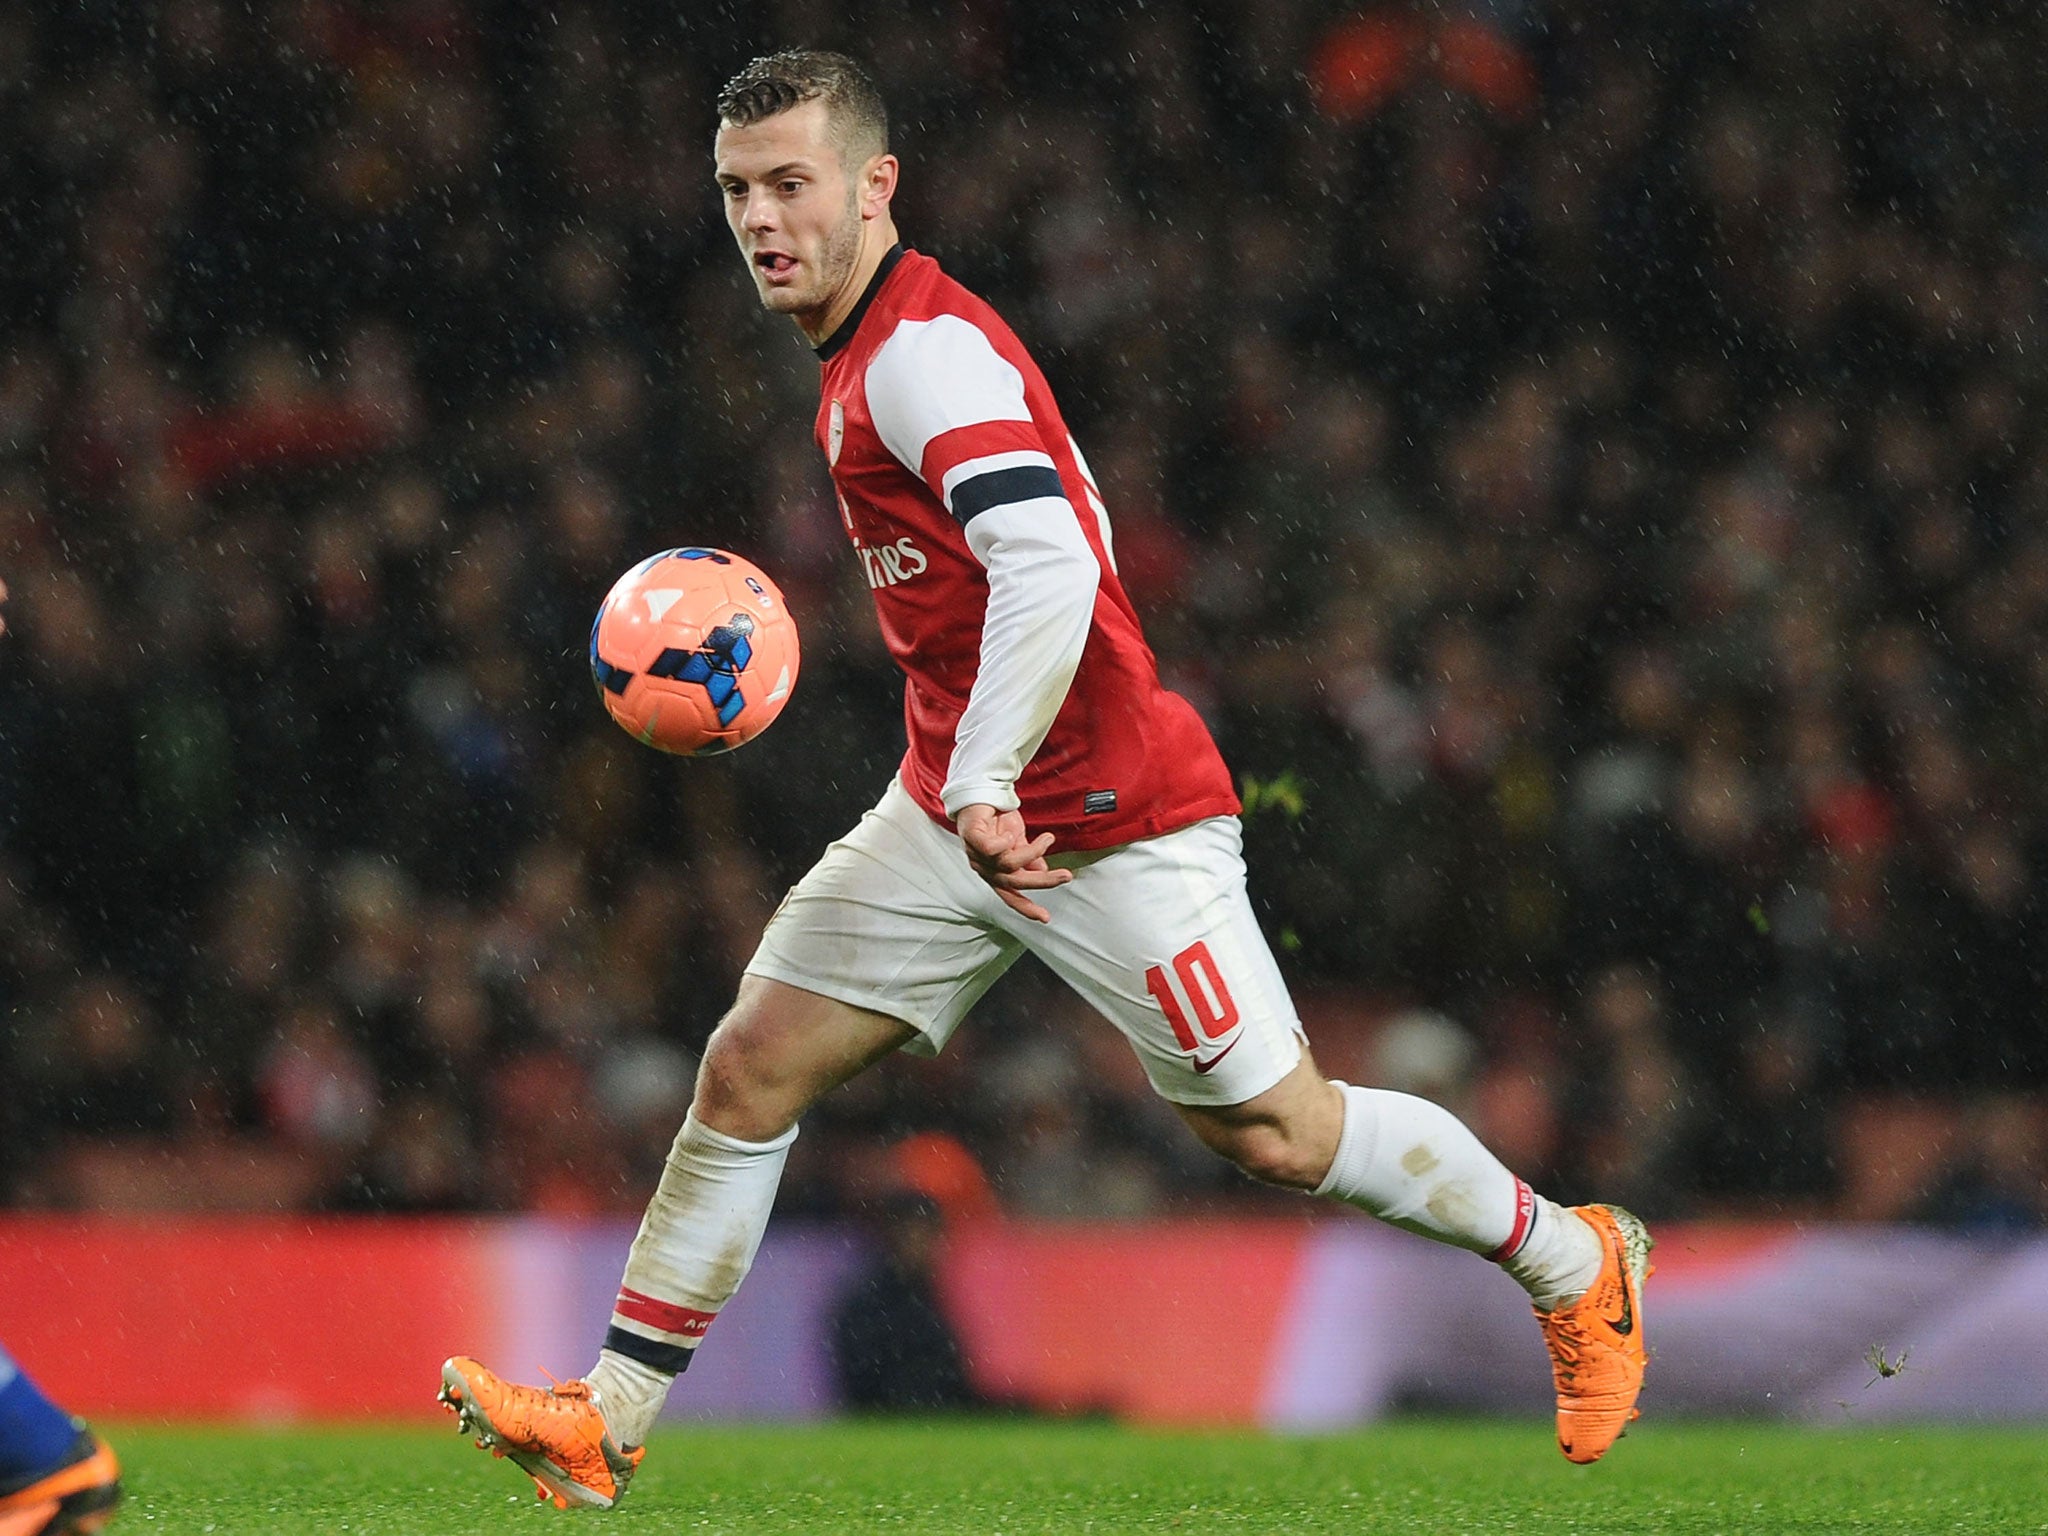 Jack Wilshere could make his return from an ankle injury in the Premier League trip to Liverpool